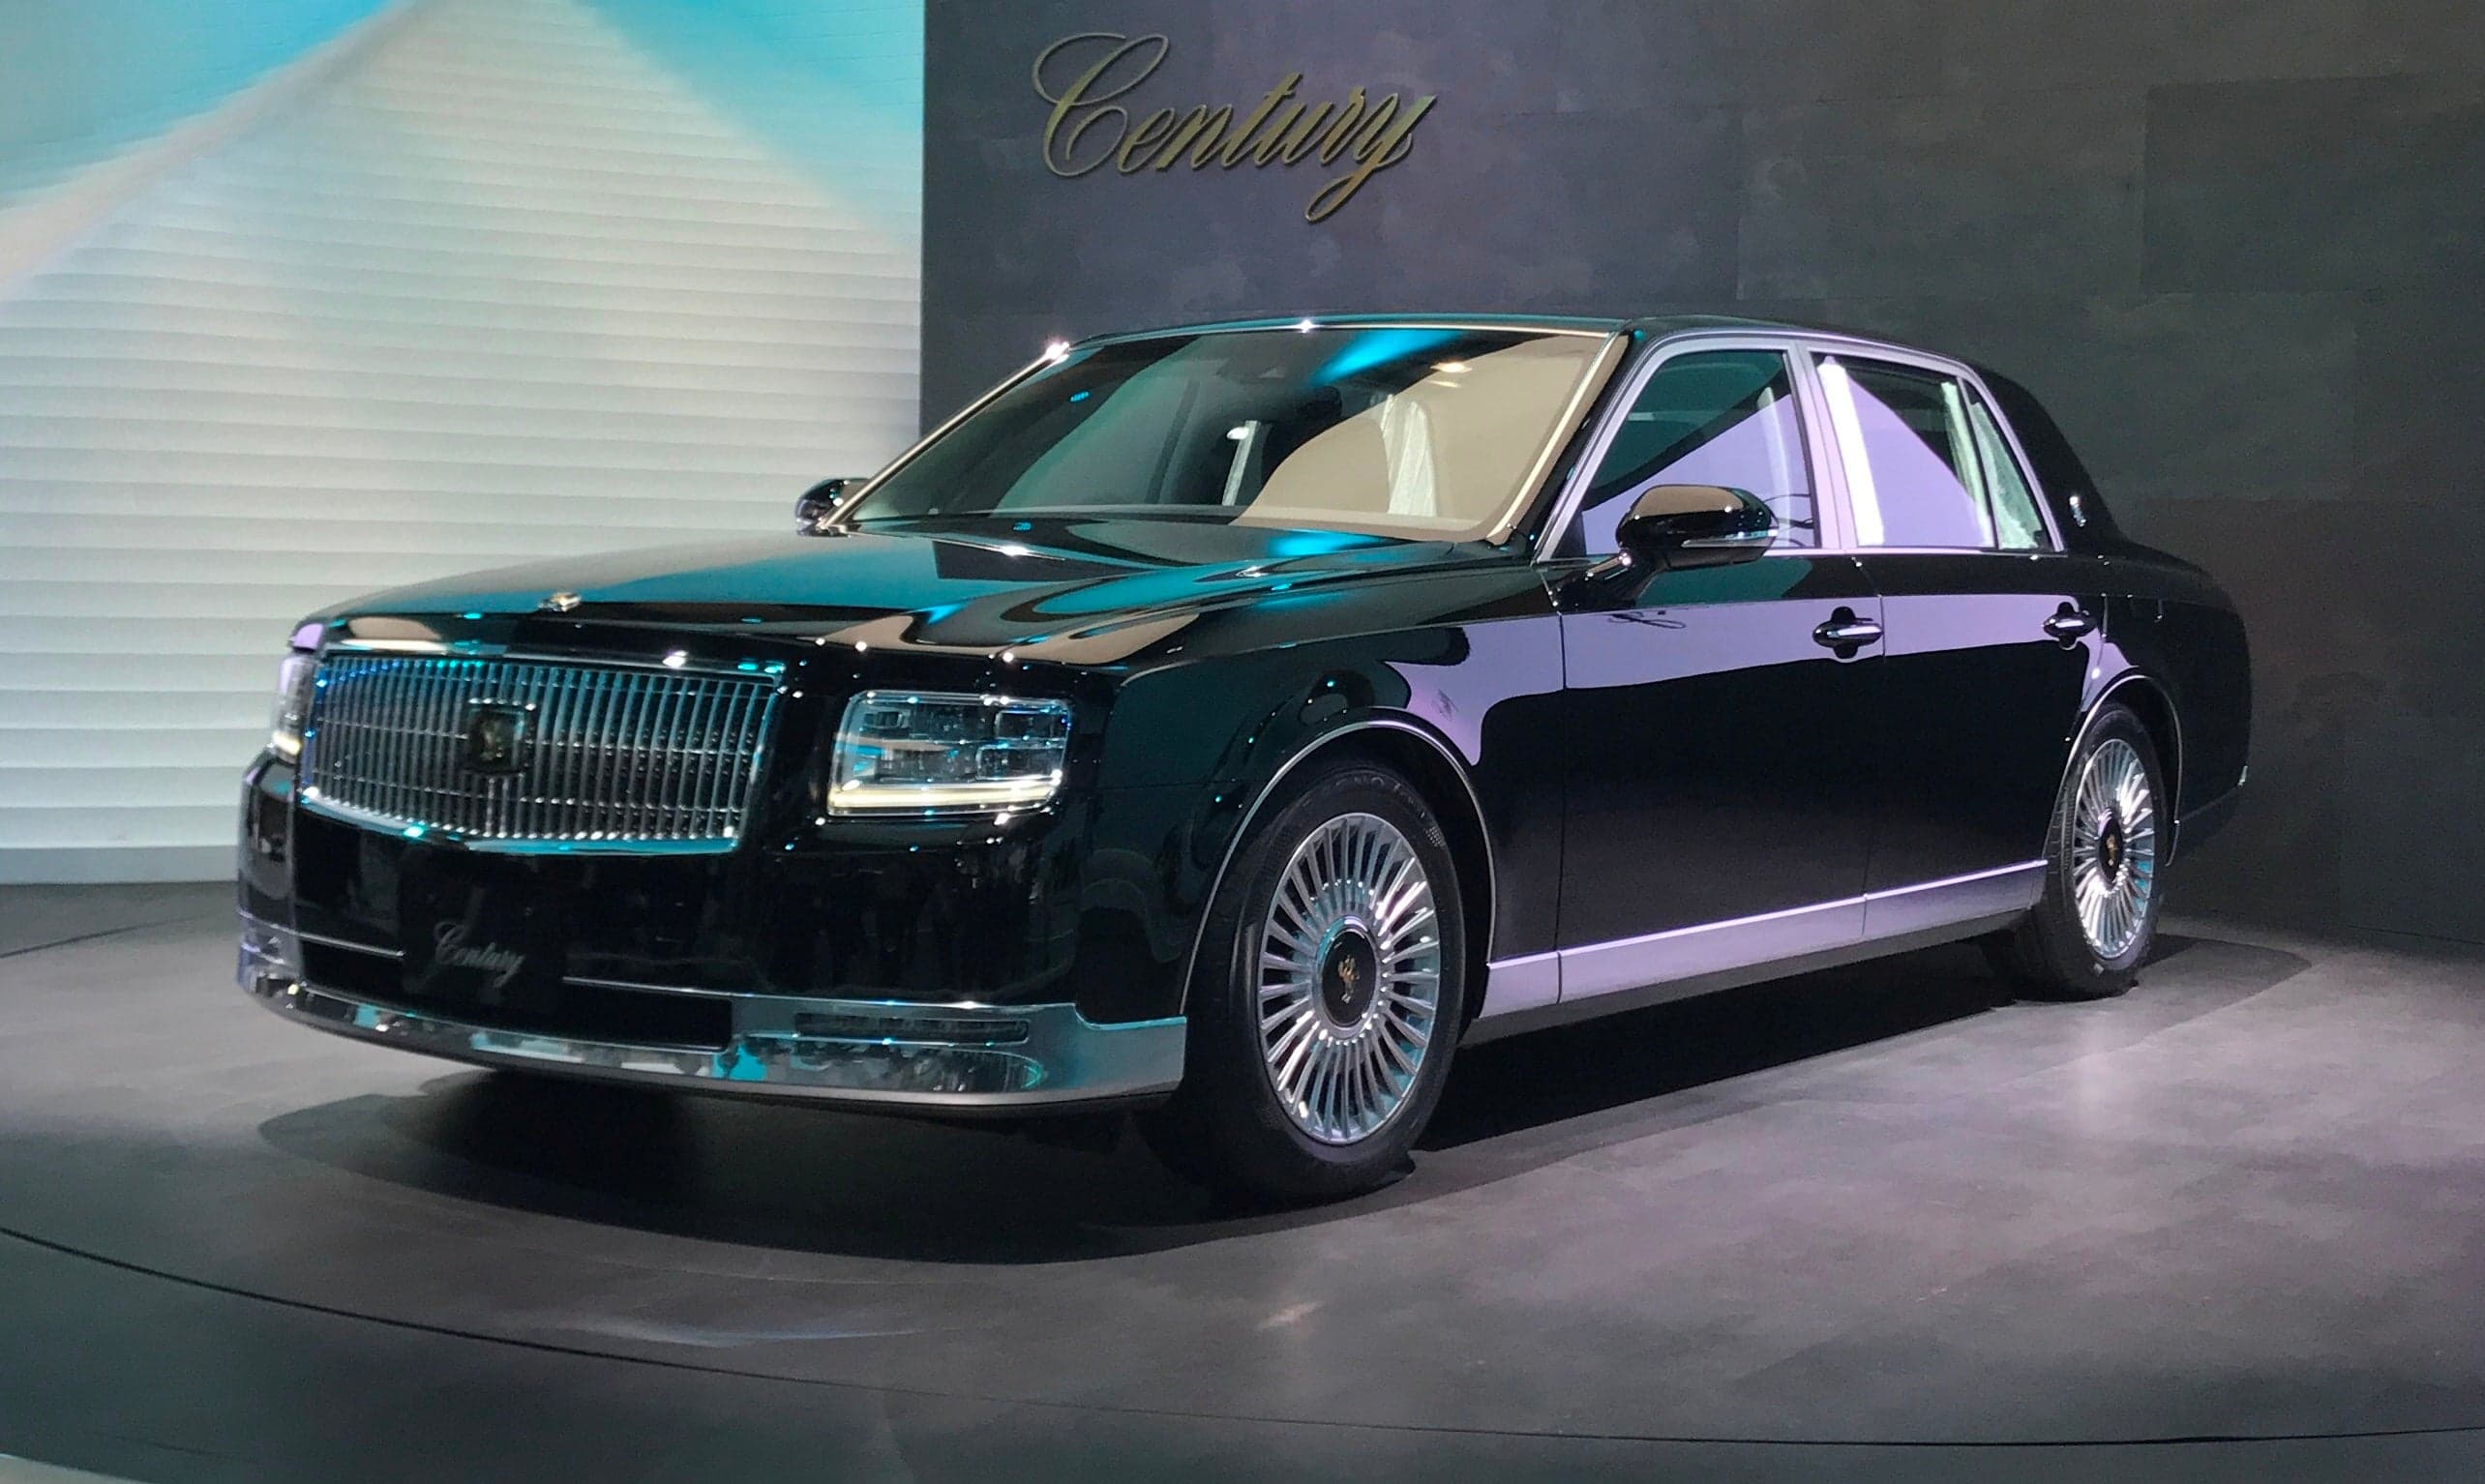 This Custom One-Off Toyota Century Is The Japanese Emperor’s New Ride